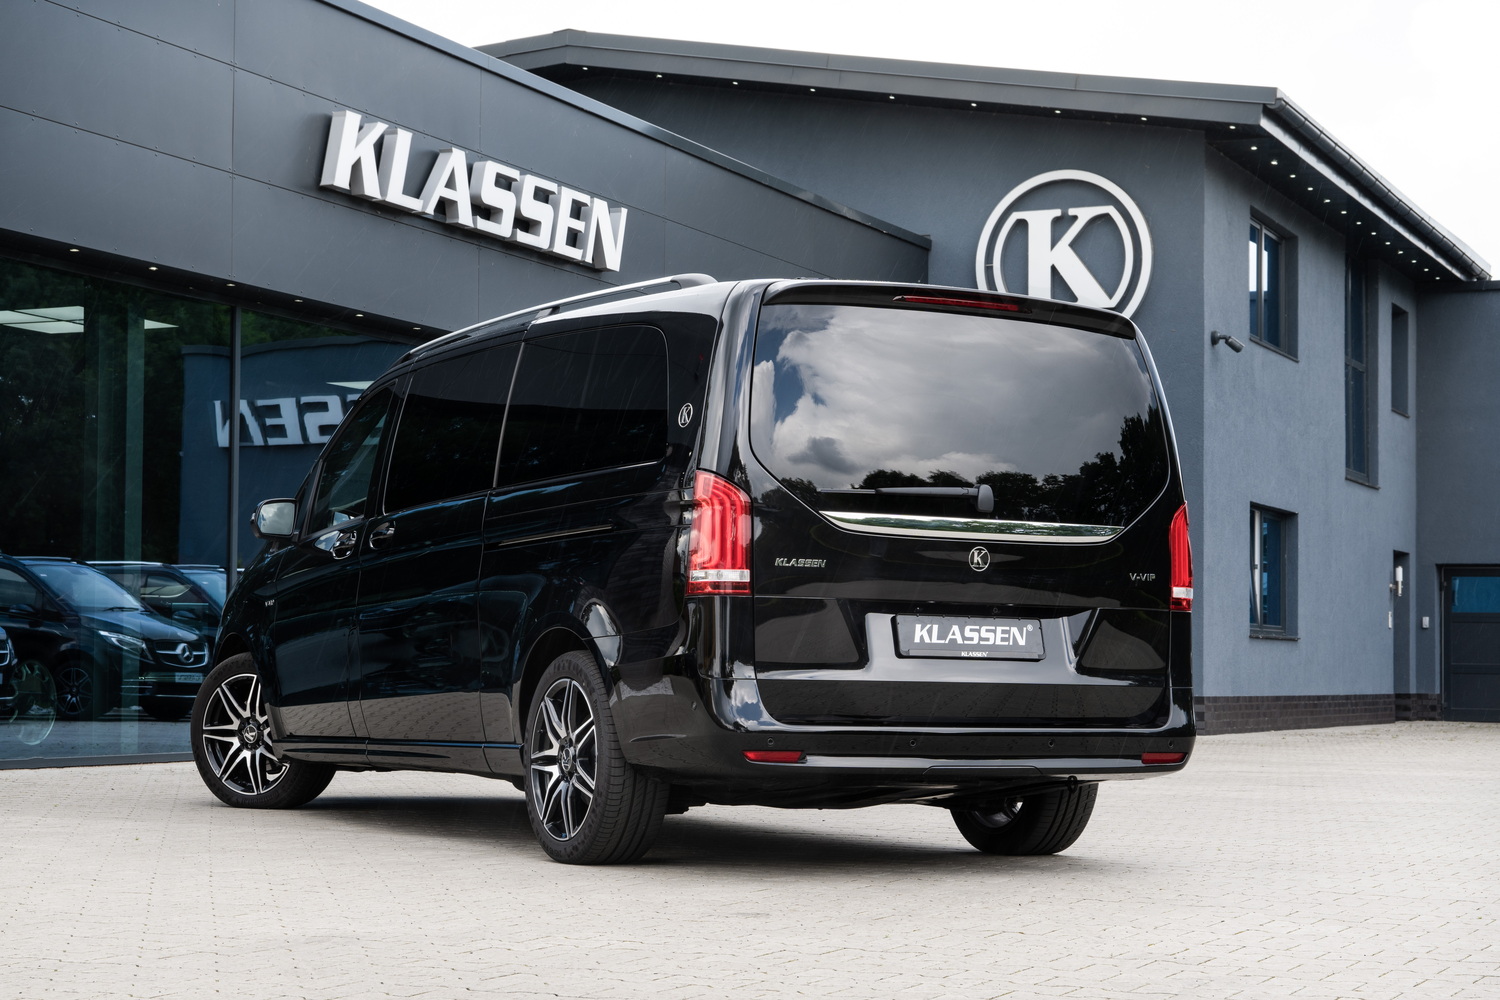 The performance of the V-Class has also been upgraded: by optimising the series standard control device, KLASSEN has unlocked the 250 D unit (series: 140kW/440Nm) to provide a mighty 39 kW extra as well enhanced torque of 500 Nm. Thanks to its extra power, the top speed has been increased by 11 km/h to 210 km/h.